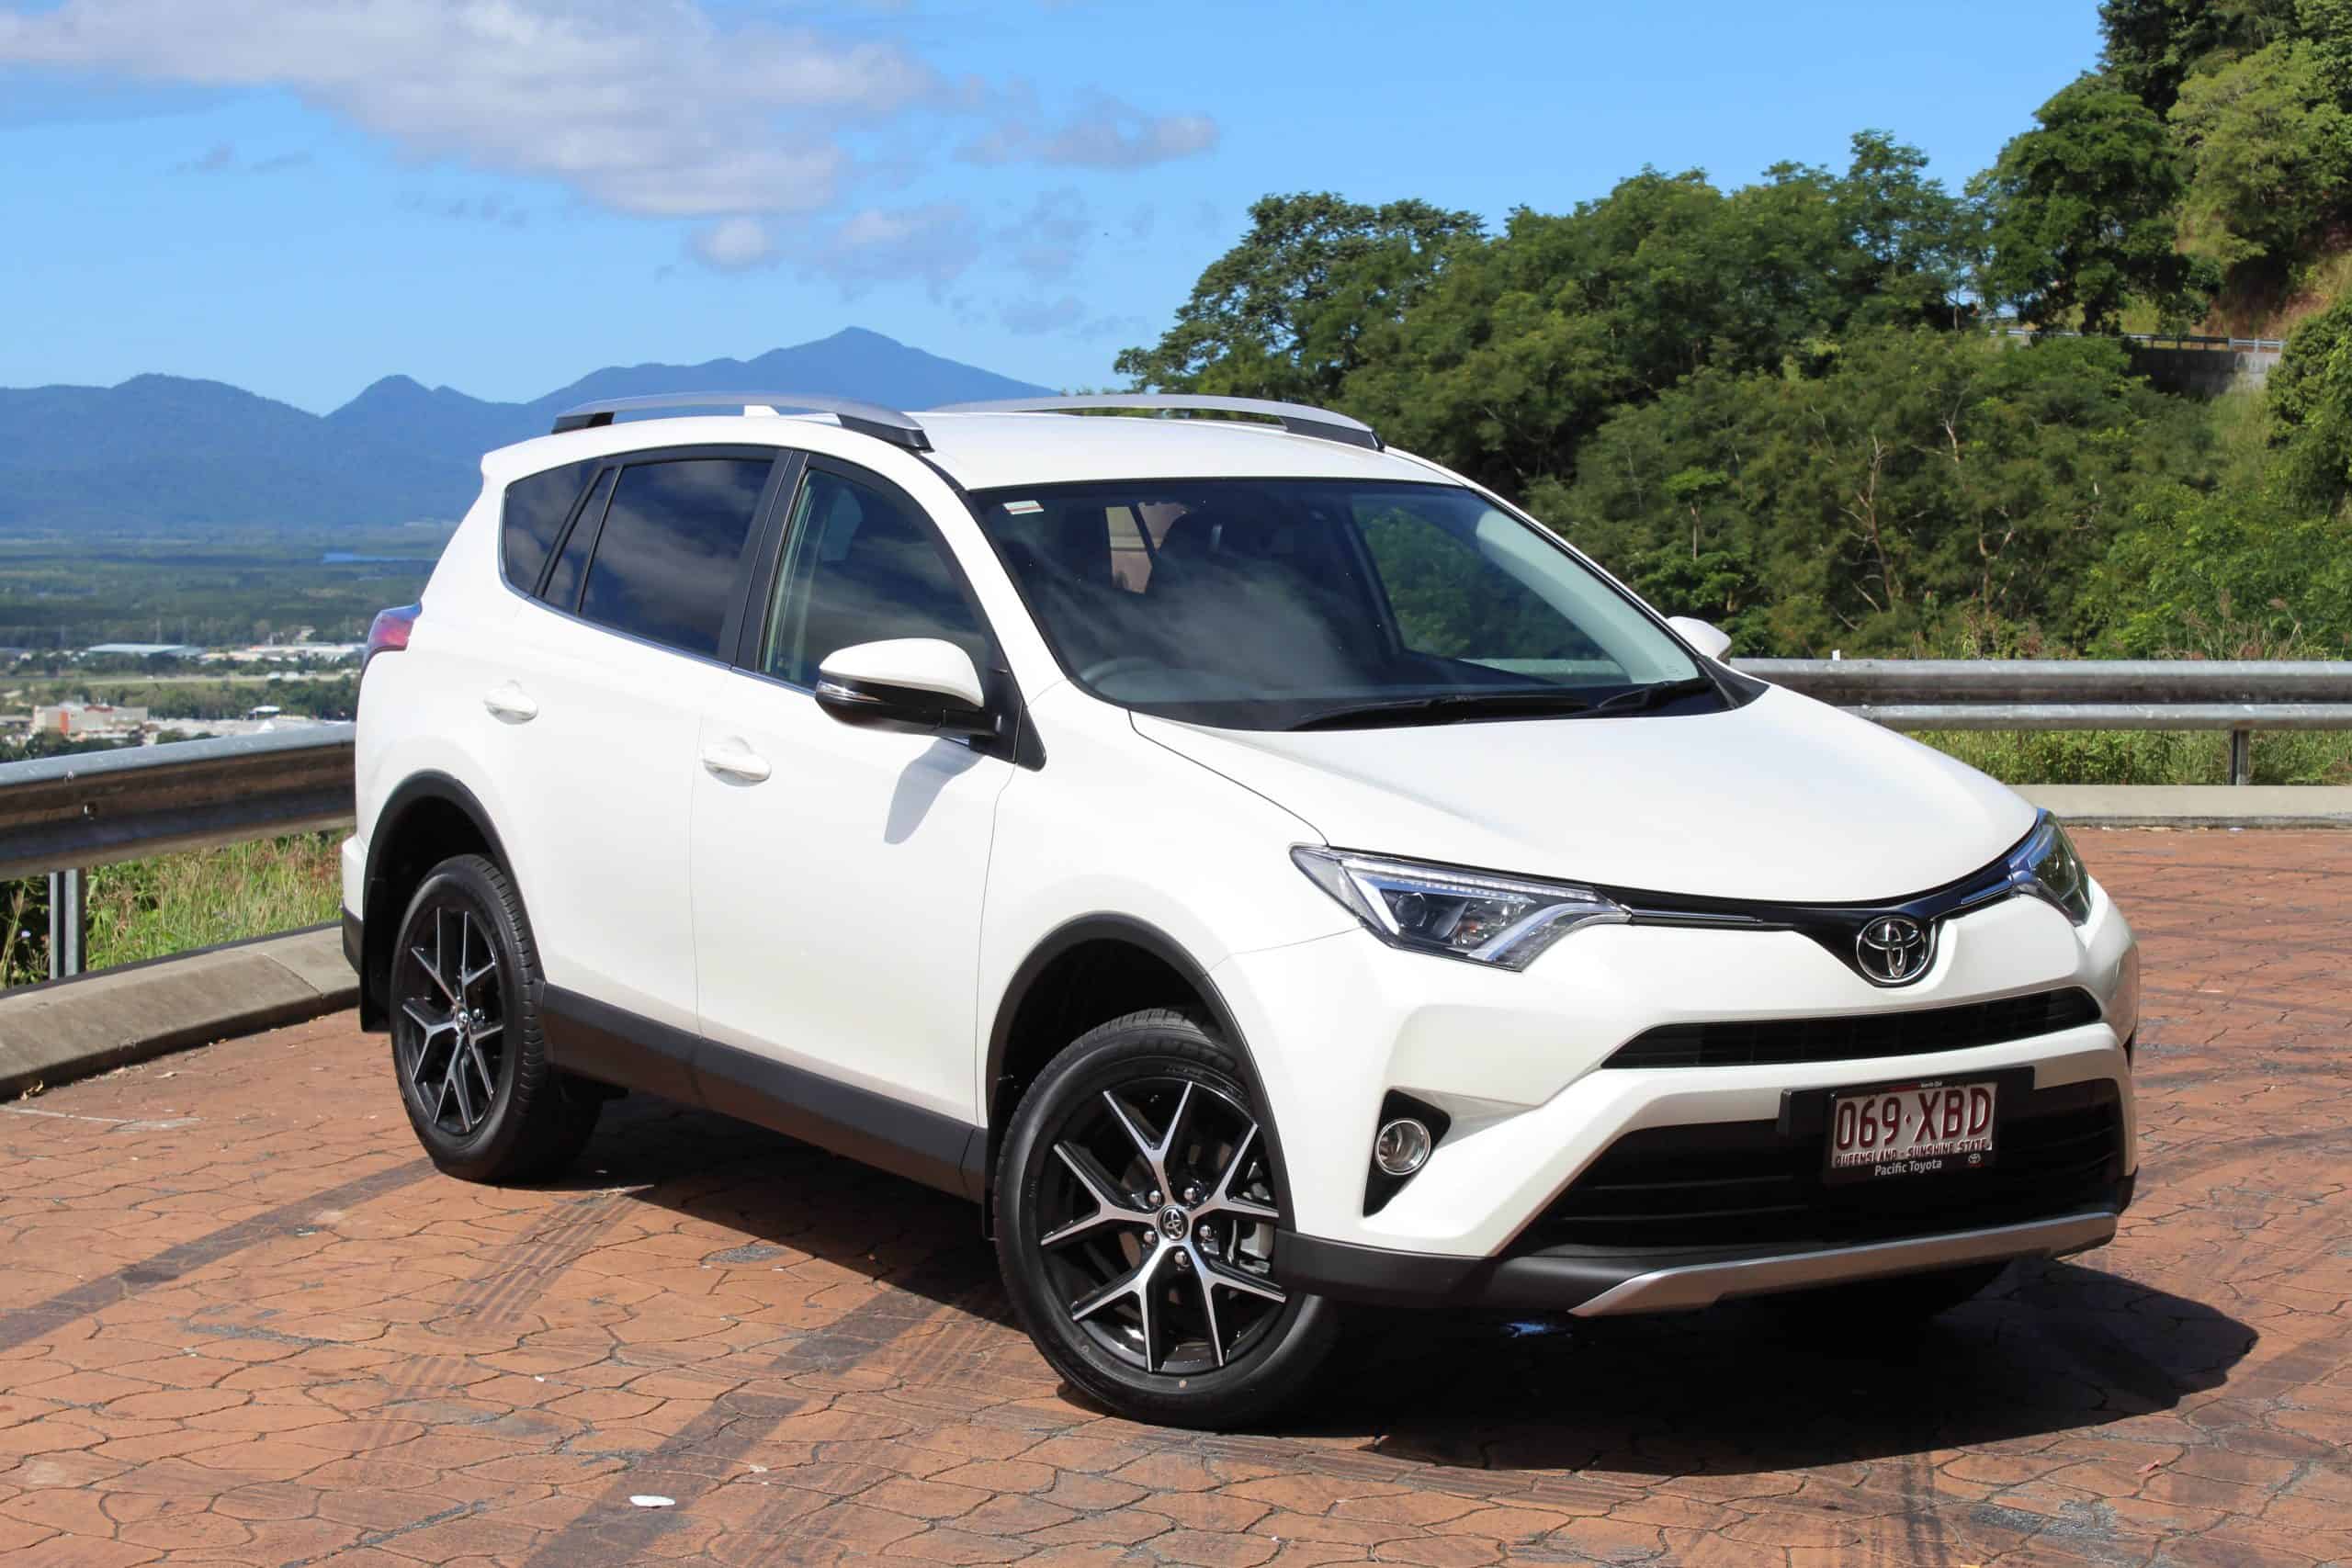 New Car for a Week: My RAV 4 GXL Review